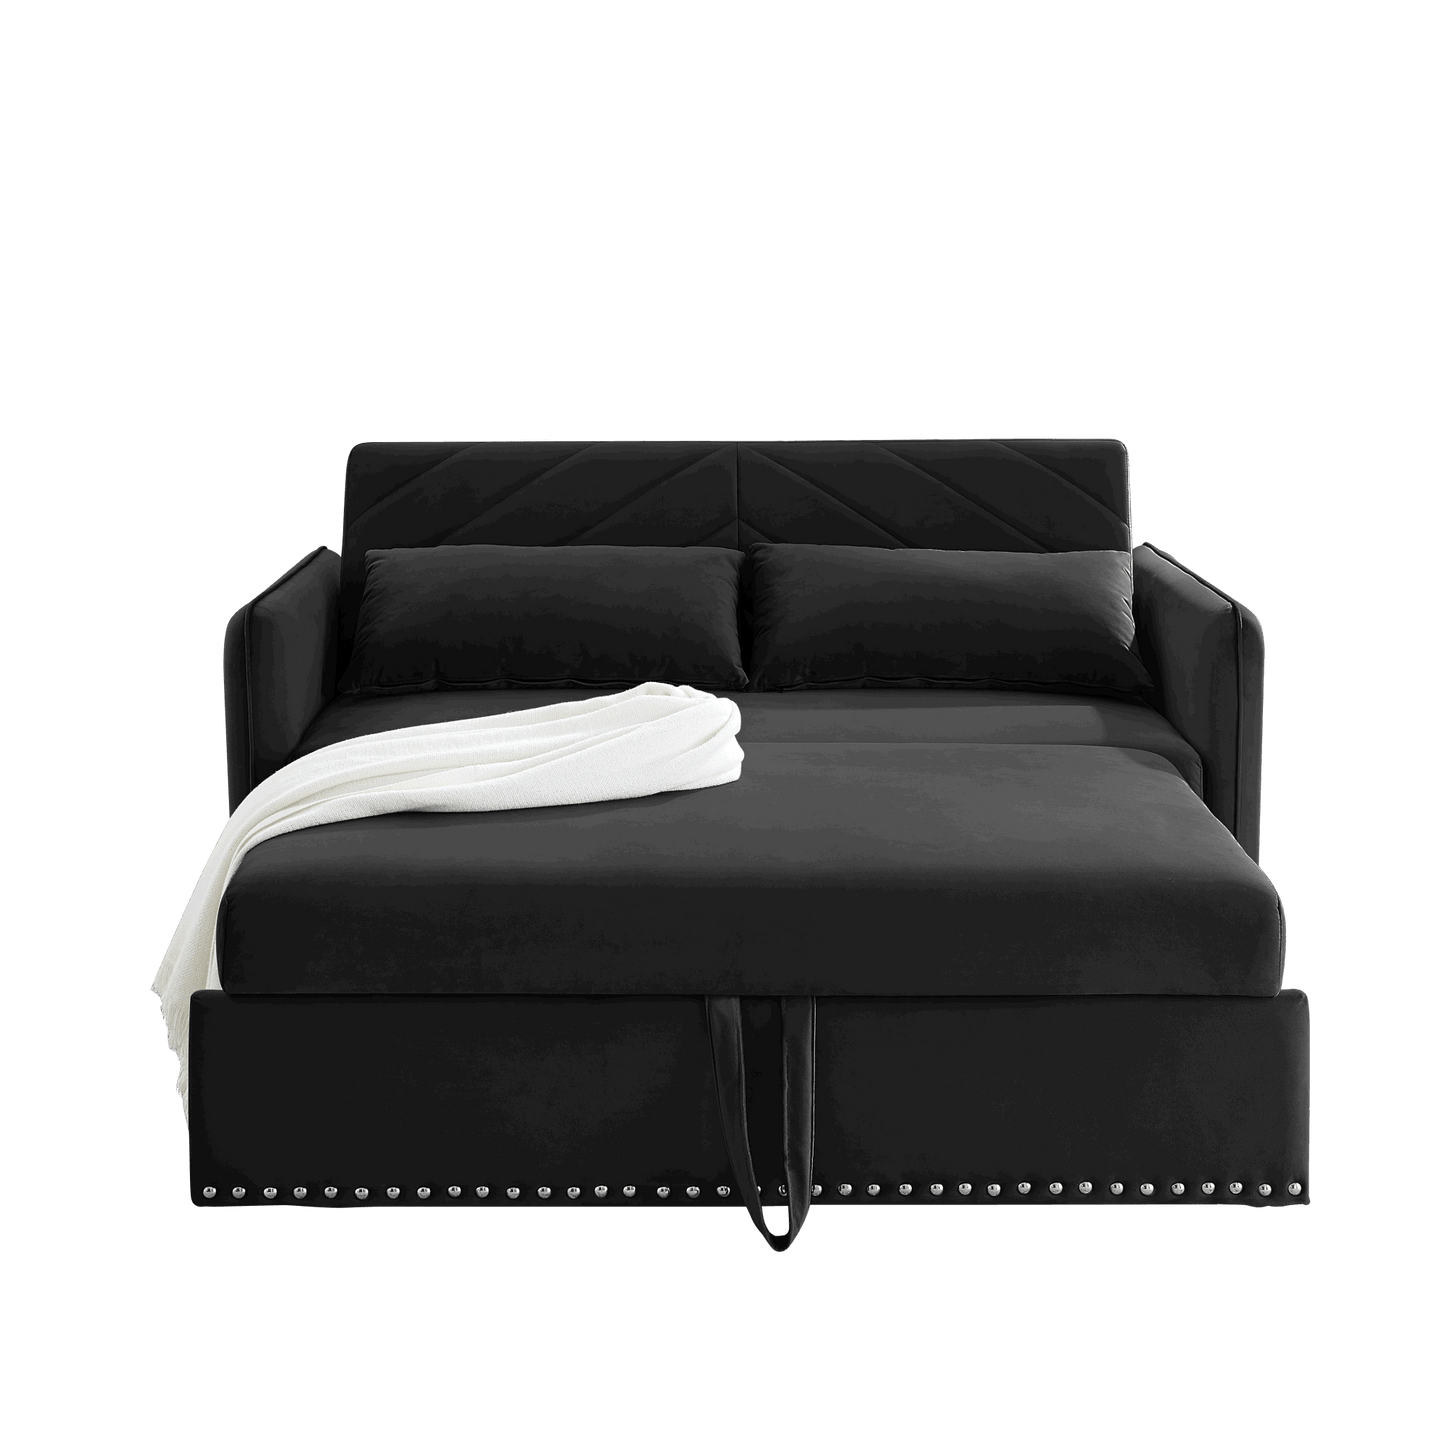 MH" Sleeper Sofa Bed w/USB Port, 3-in-1 adjustable sleeper with pull-out bed, 2 lumbar pillows and side pocket, soft velvet convertible sleeper sofa bed, suitable for living room bedroom